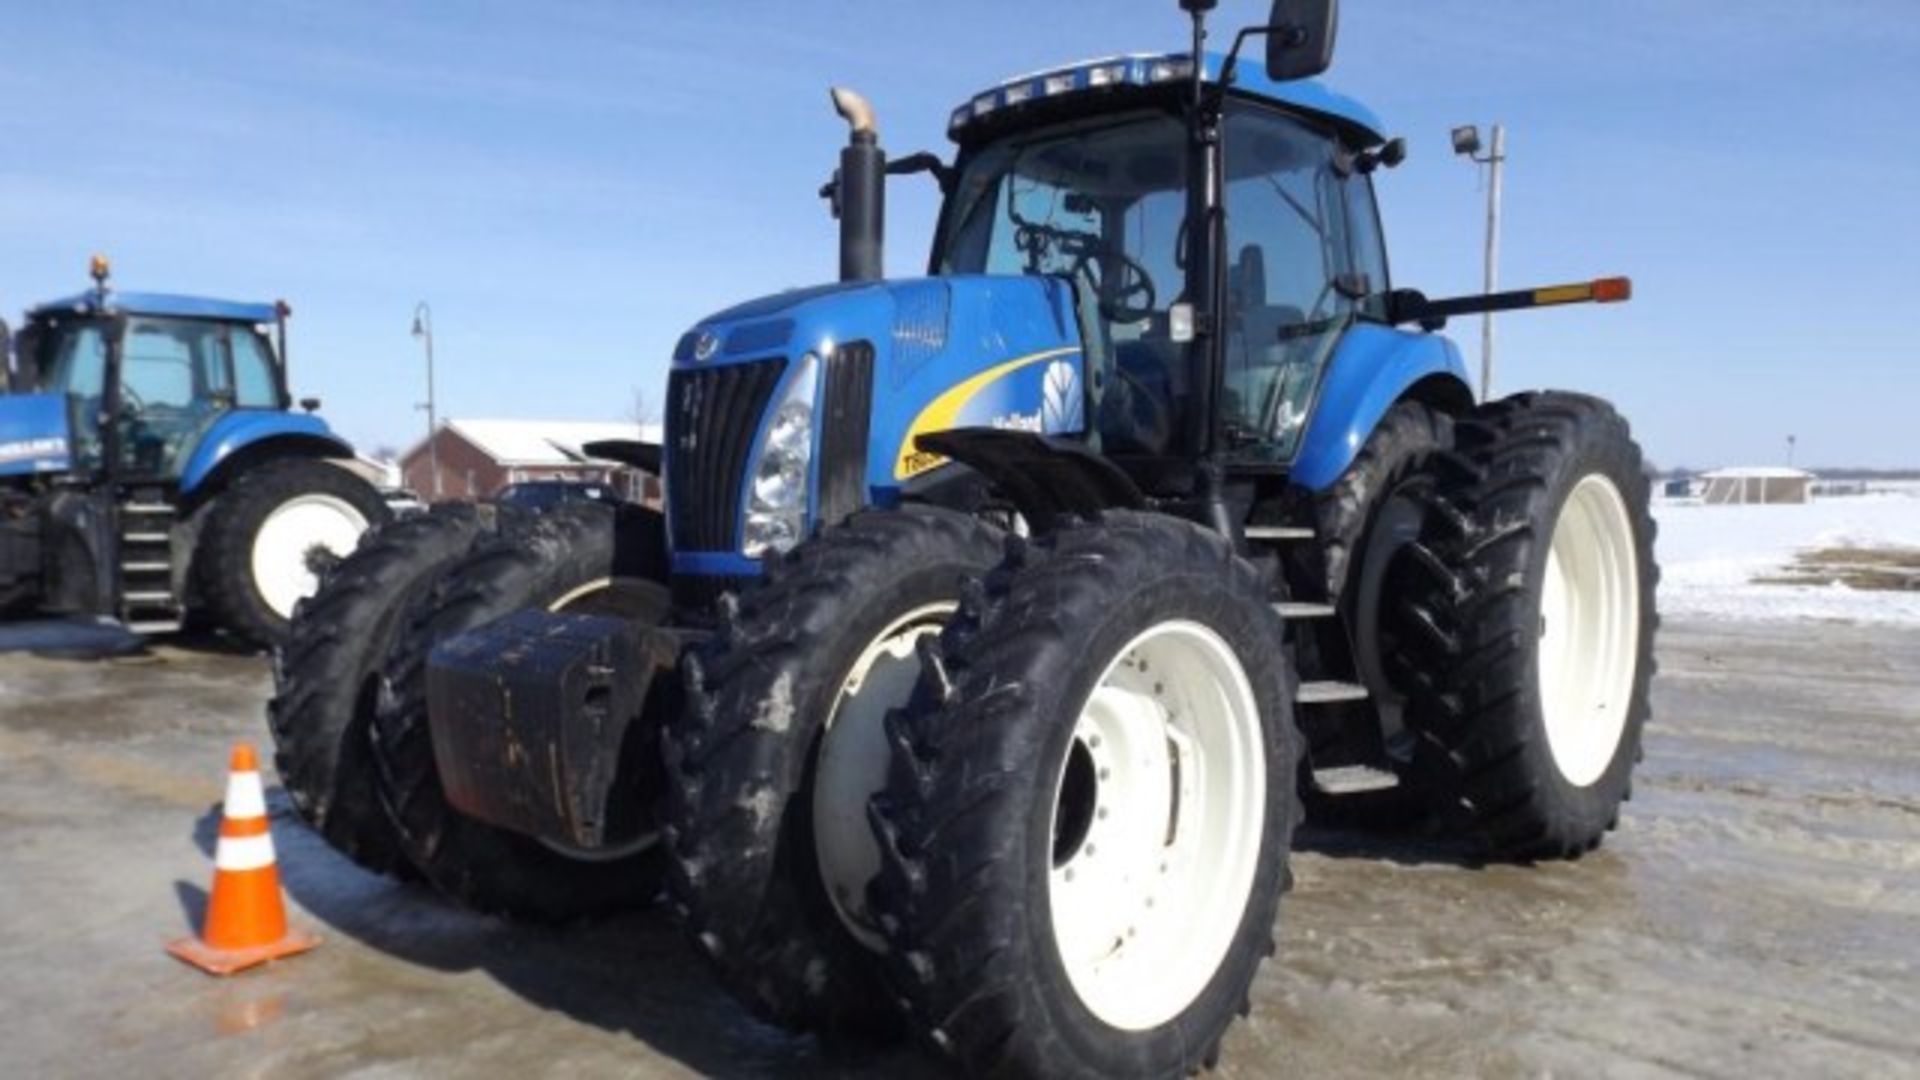 New Holland T8030 Tractor '10, sn# ZARW07507 1004 Hrs, Deluxe Cab, Buddy Seat, 303 HP, 18/4 PS, 3